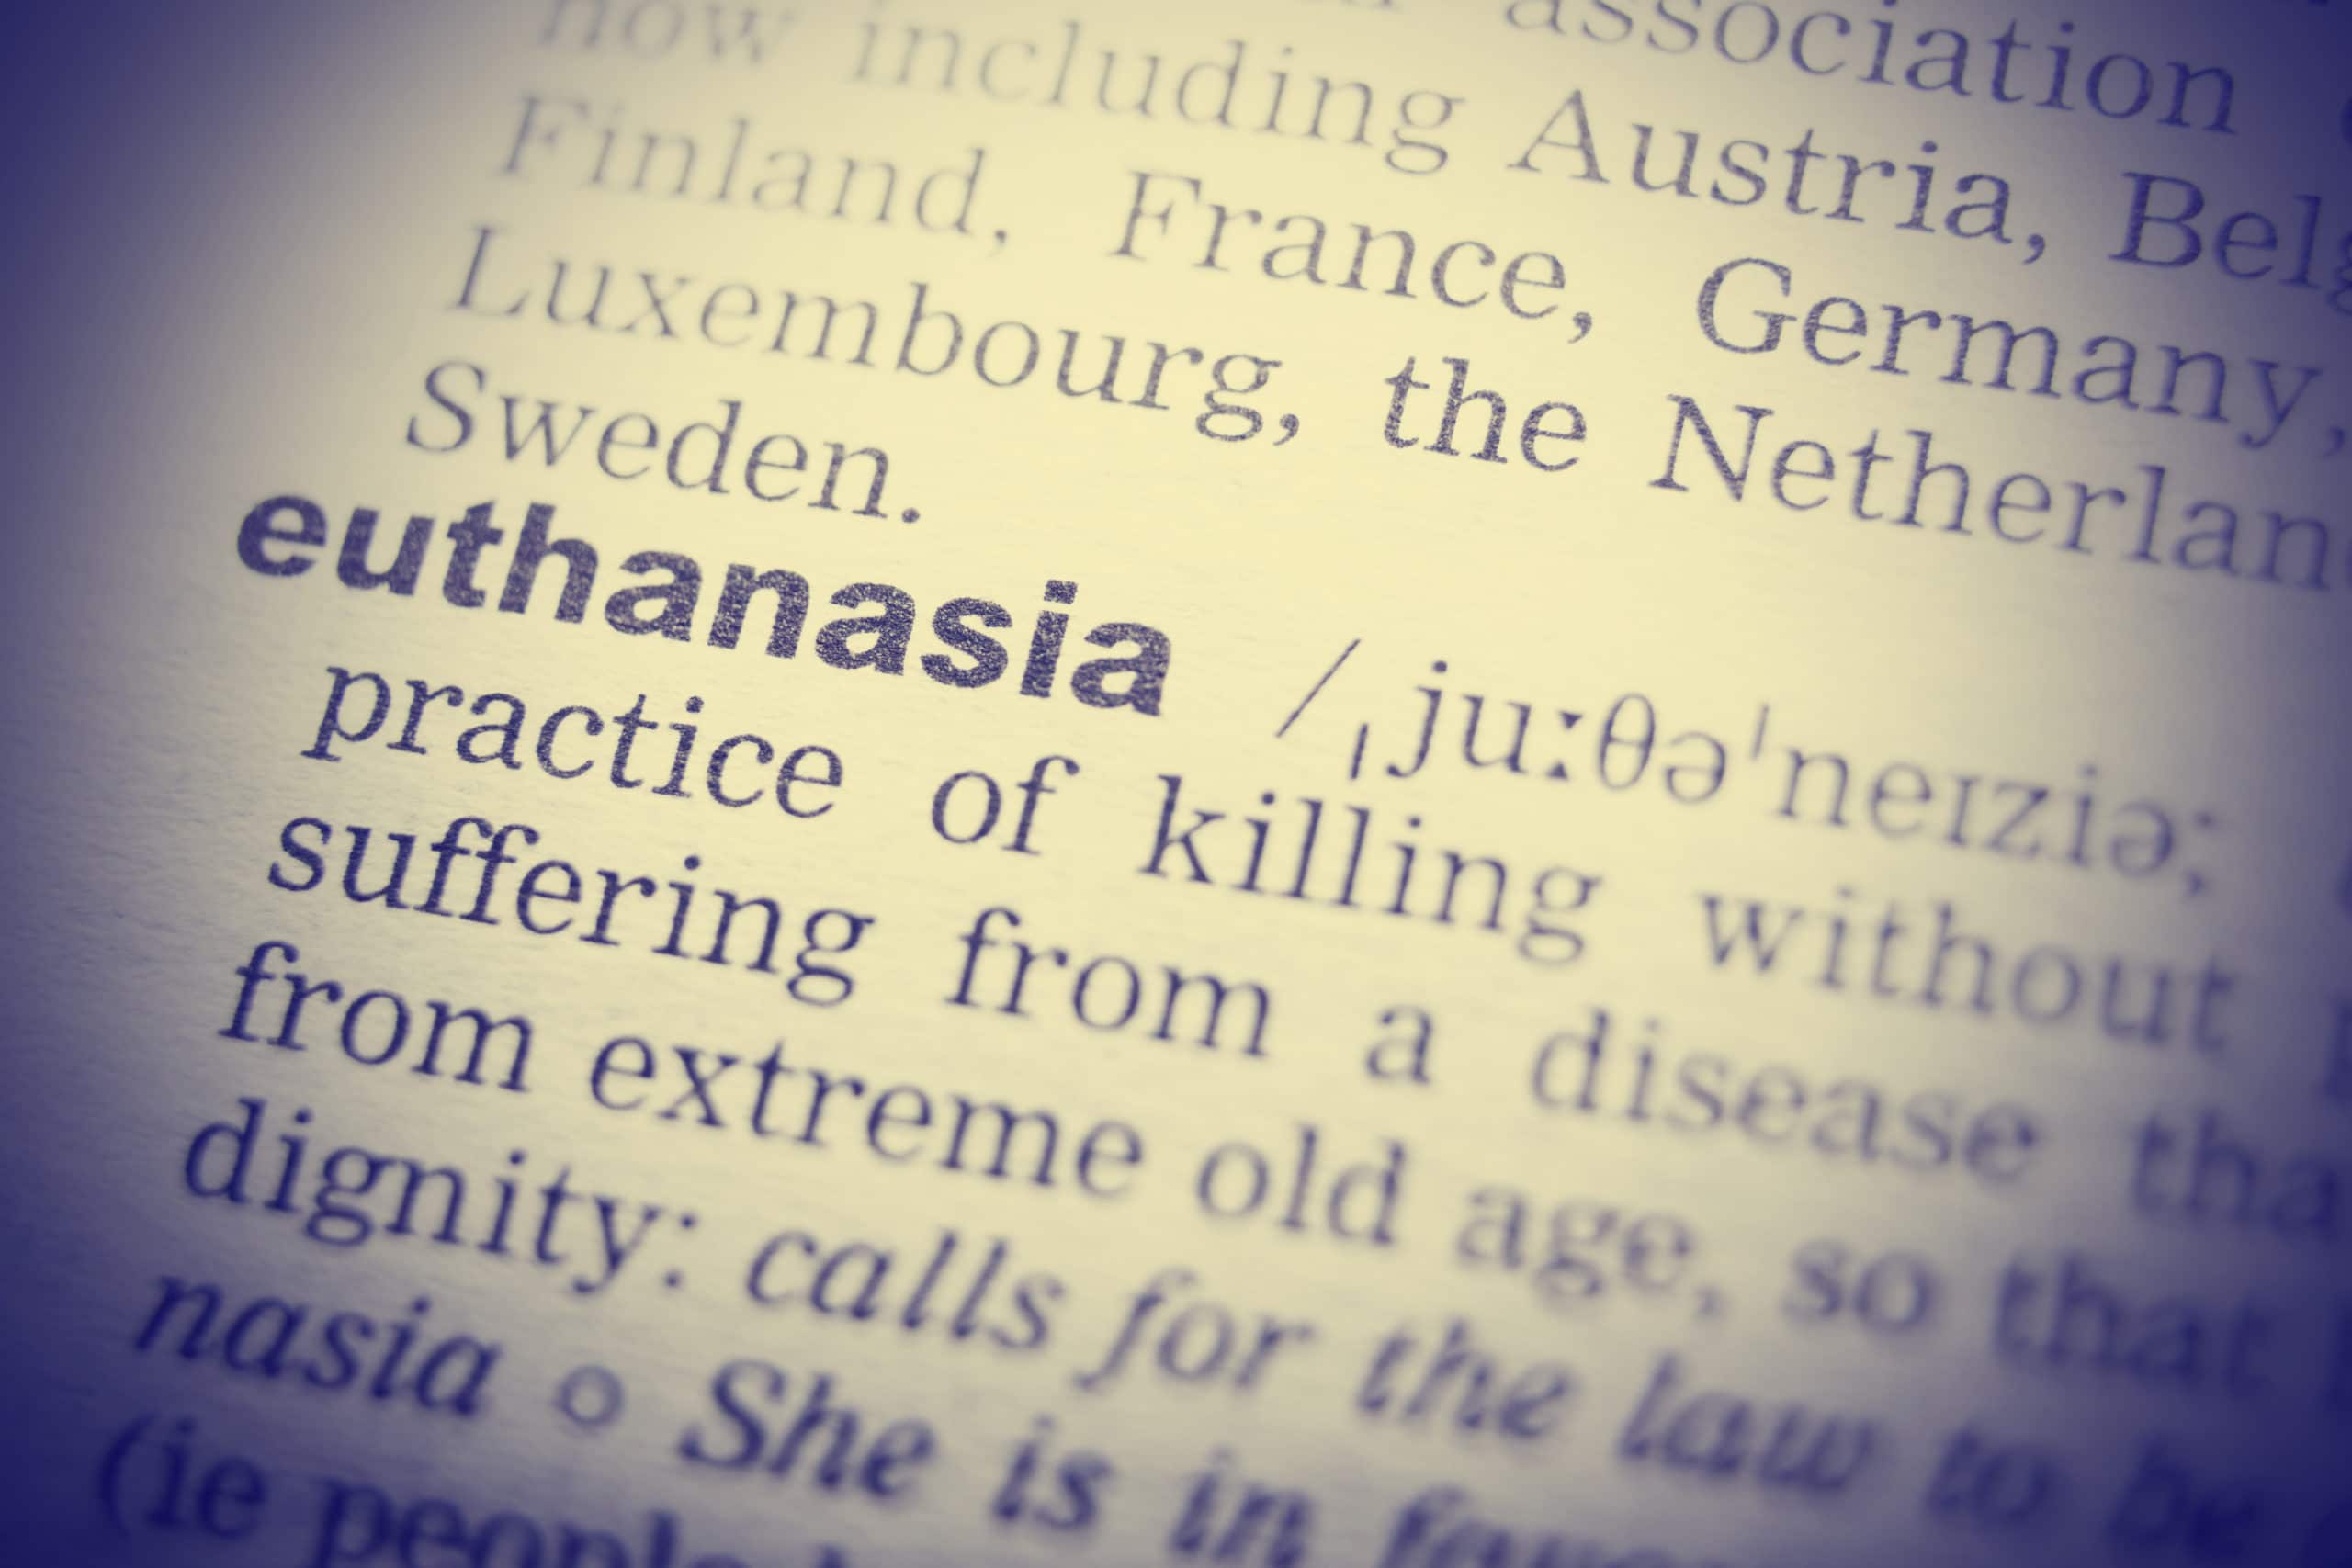 Definition of word euthanasia in dictionary. Close up shot